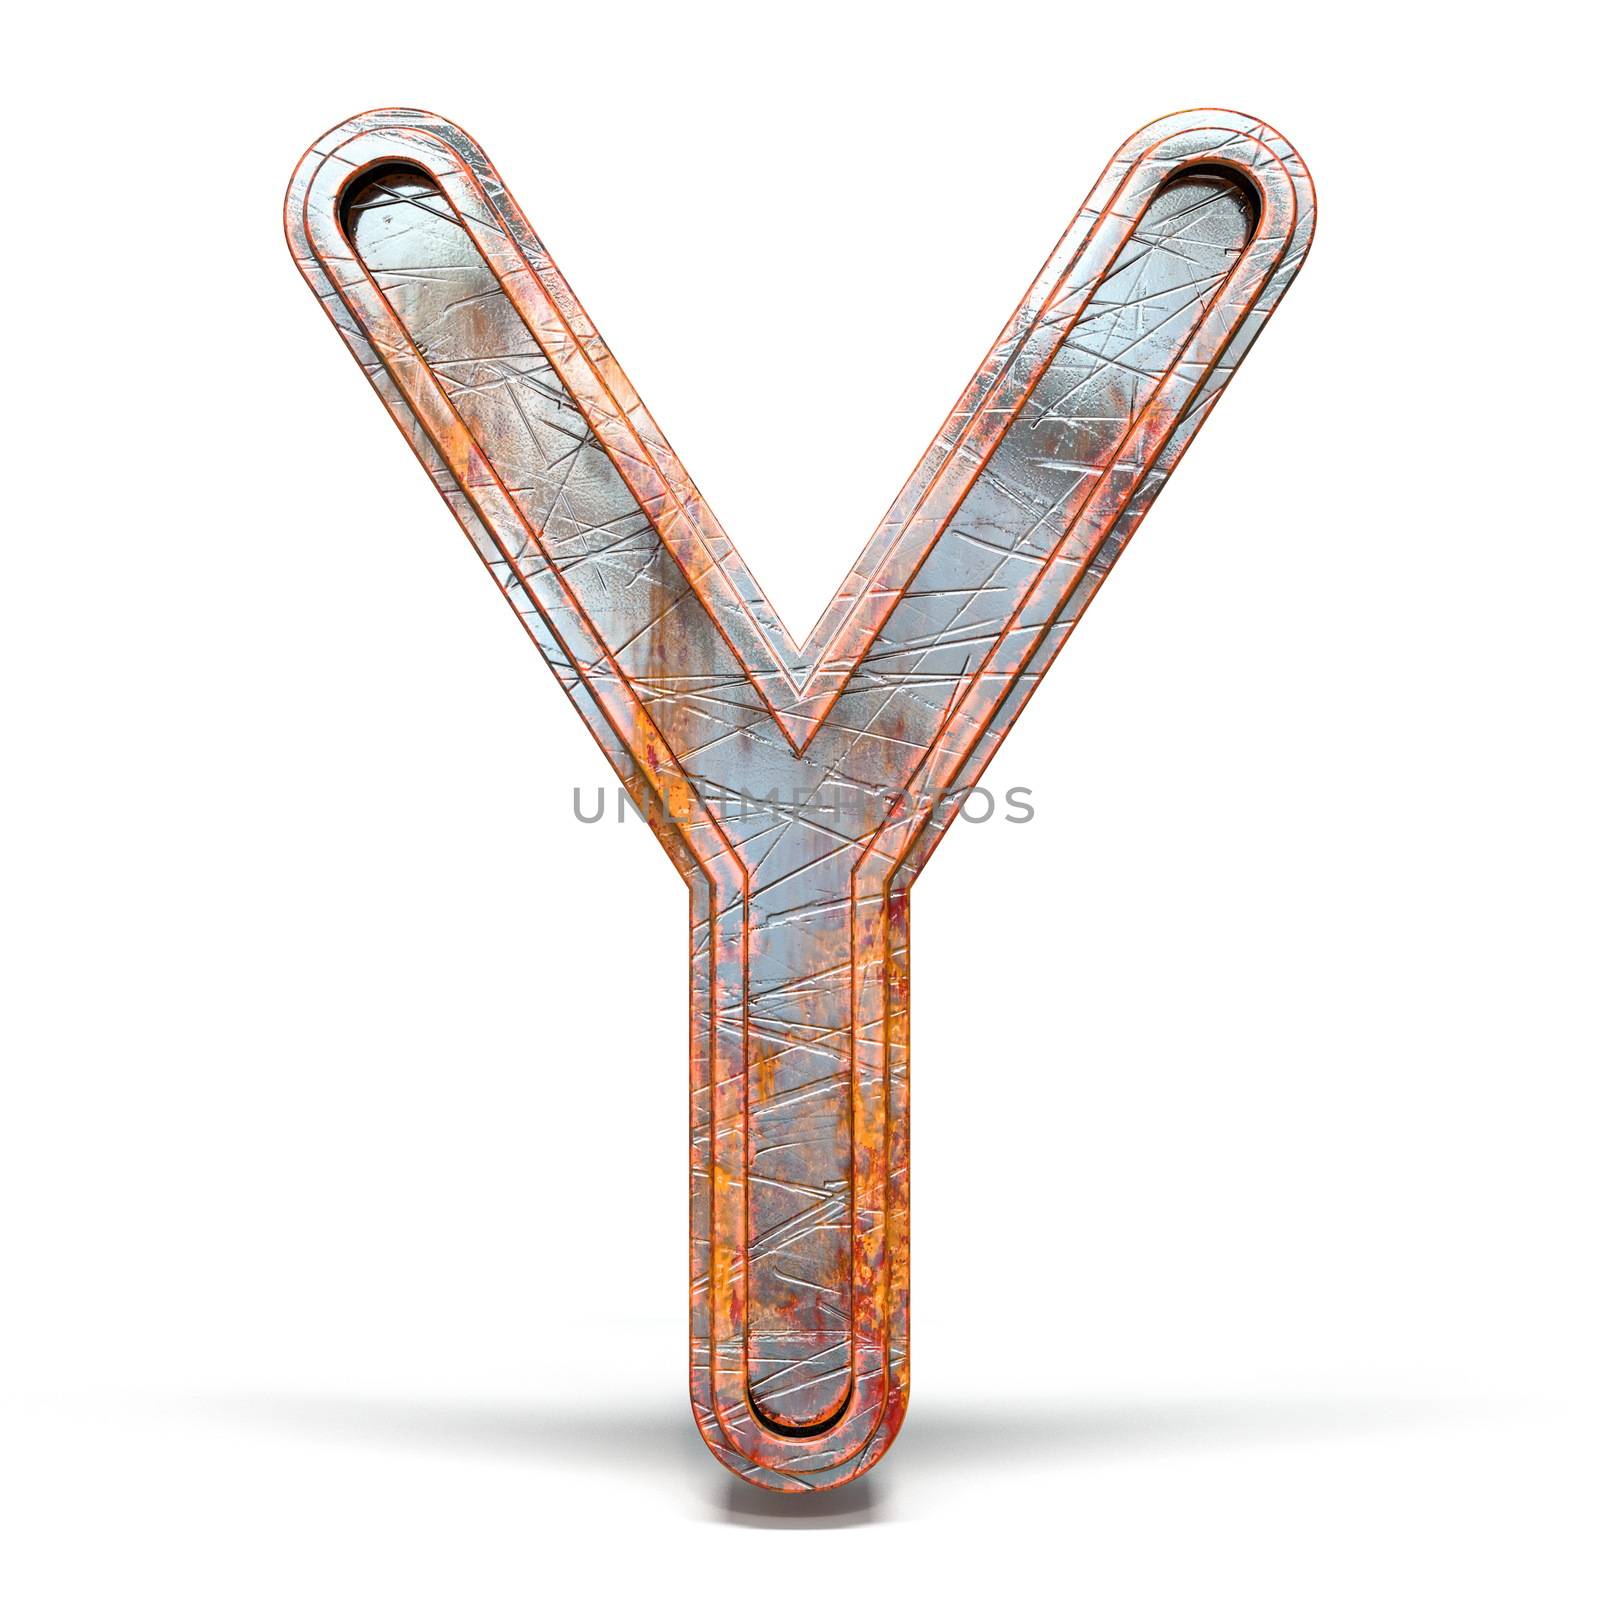 Rusty metal font Letter Y 3D render illustration isolated on white background